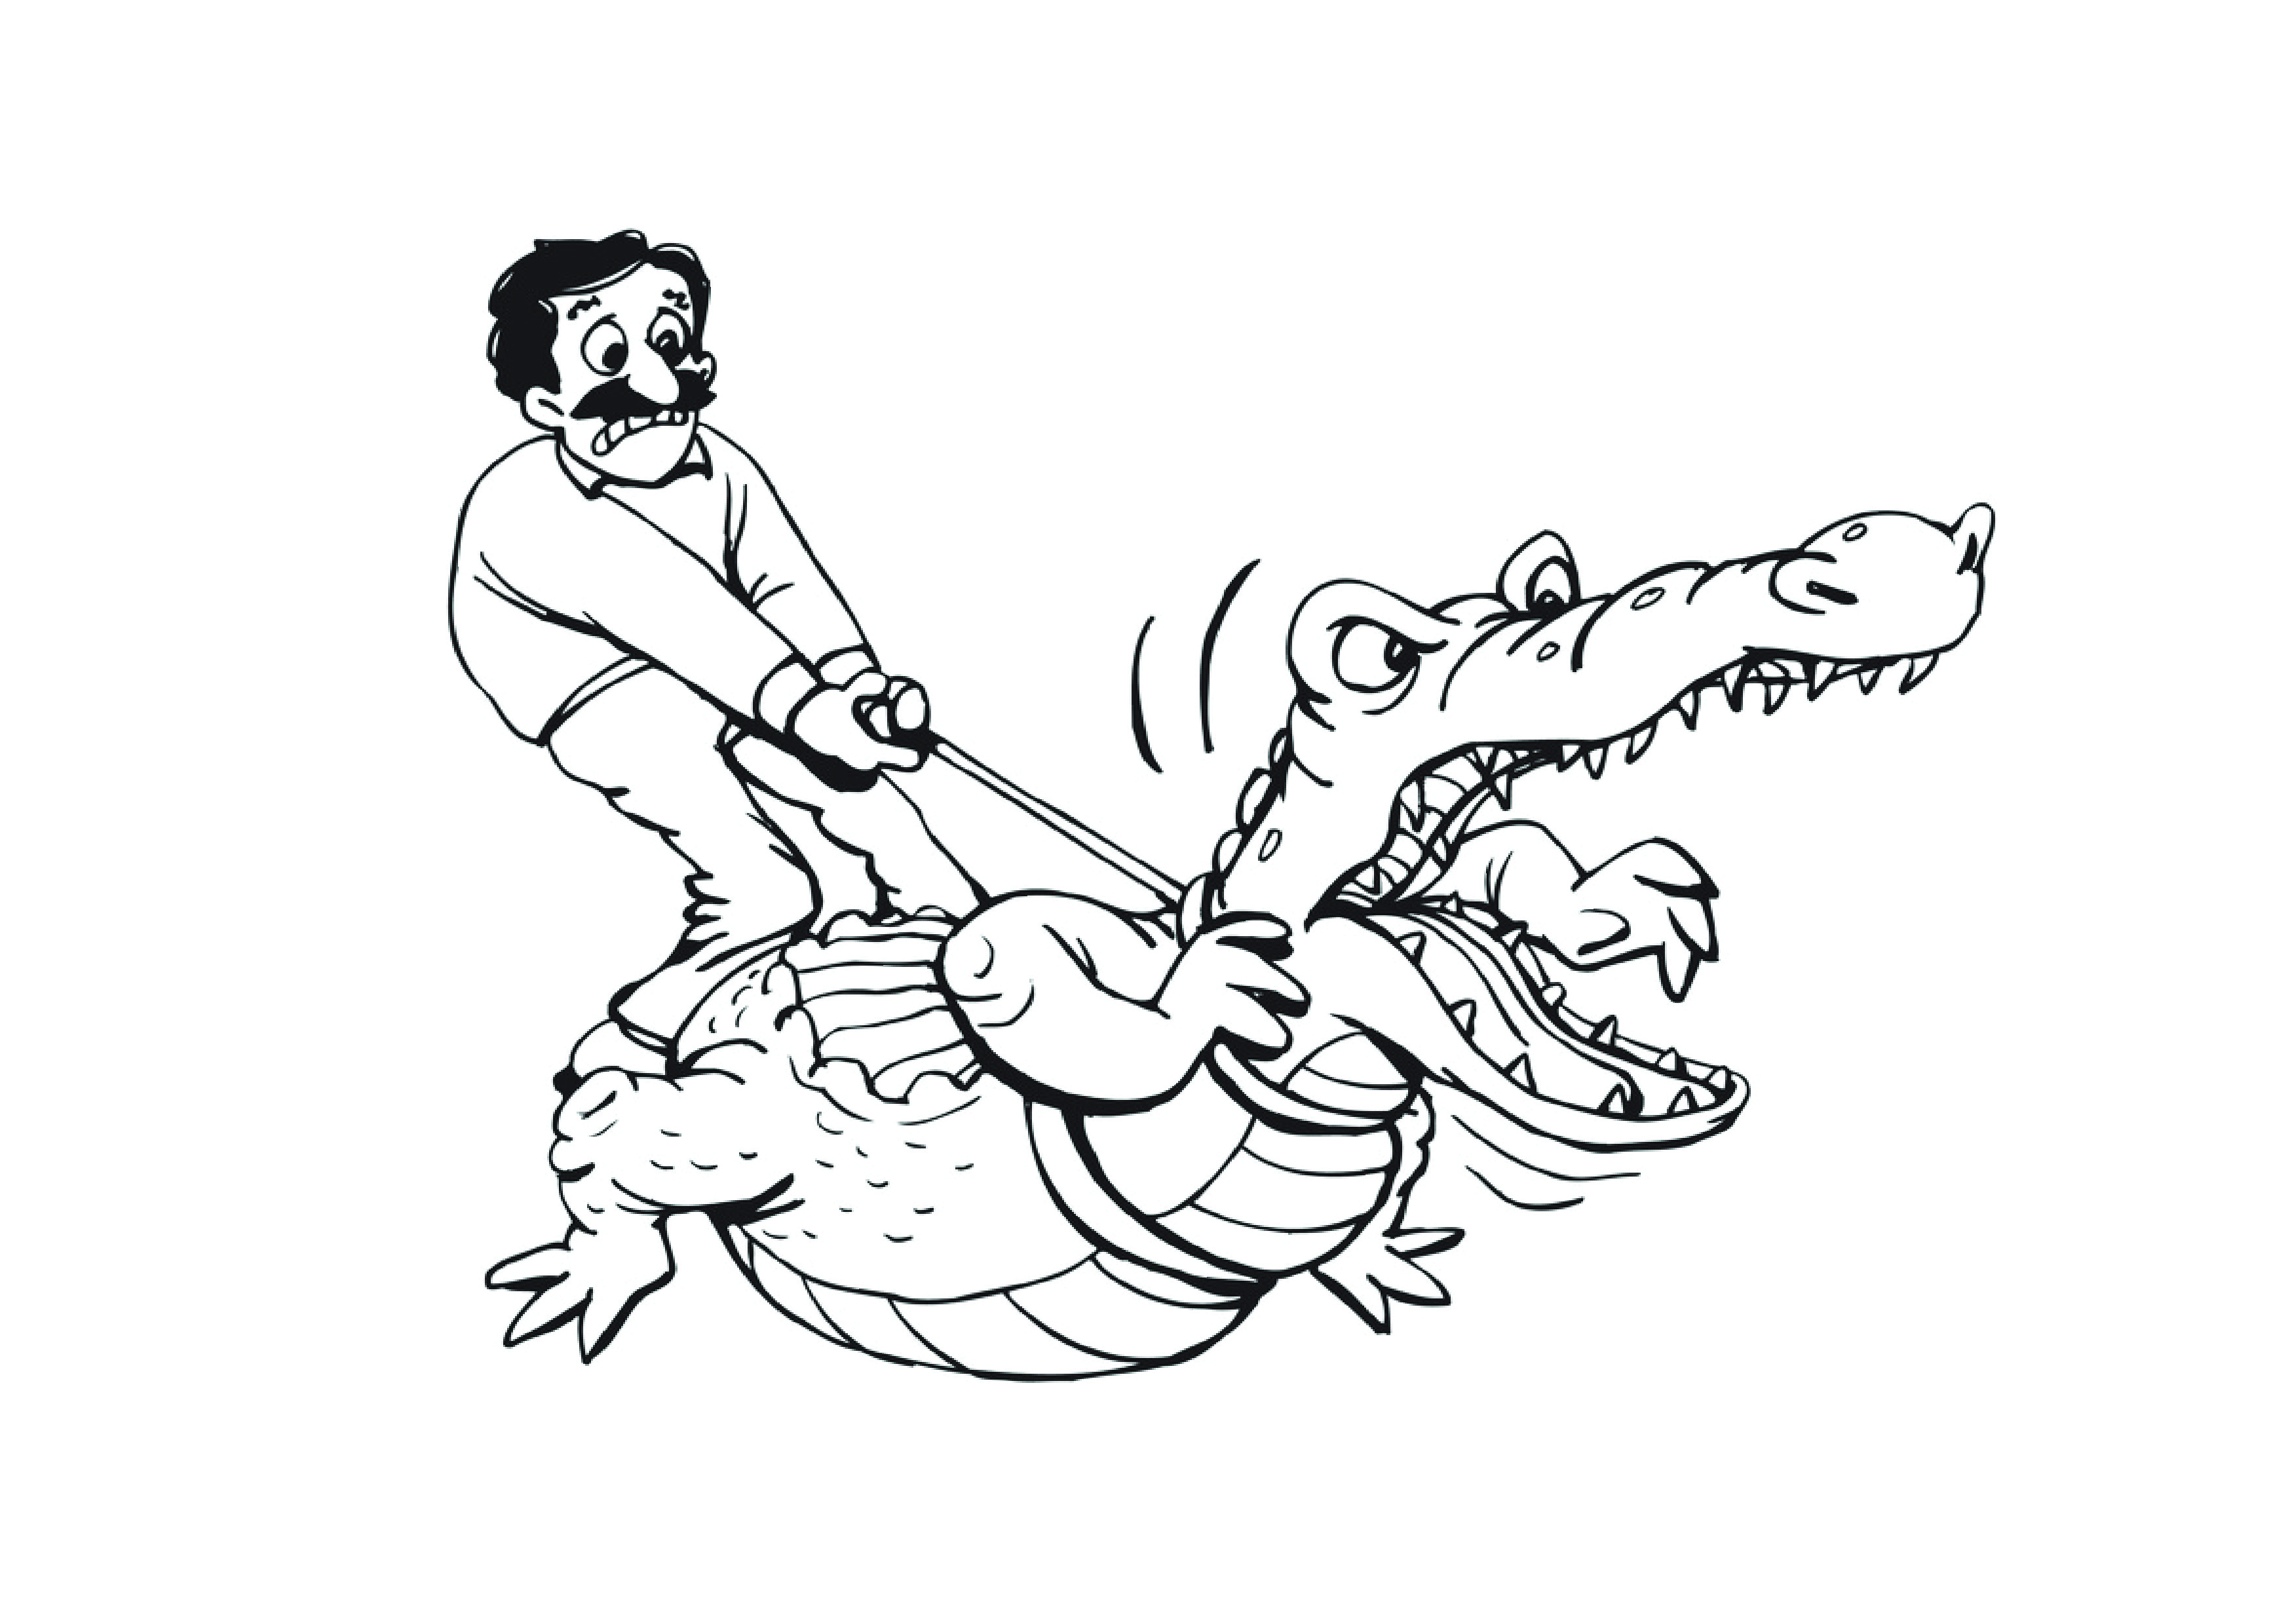 Alligator Coloring Page on a Leash